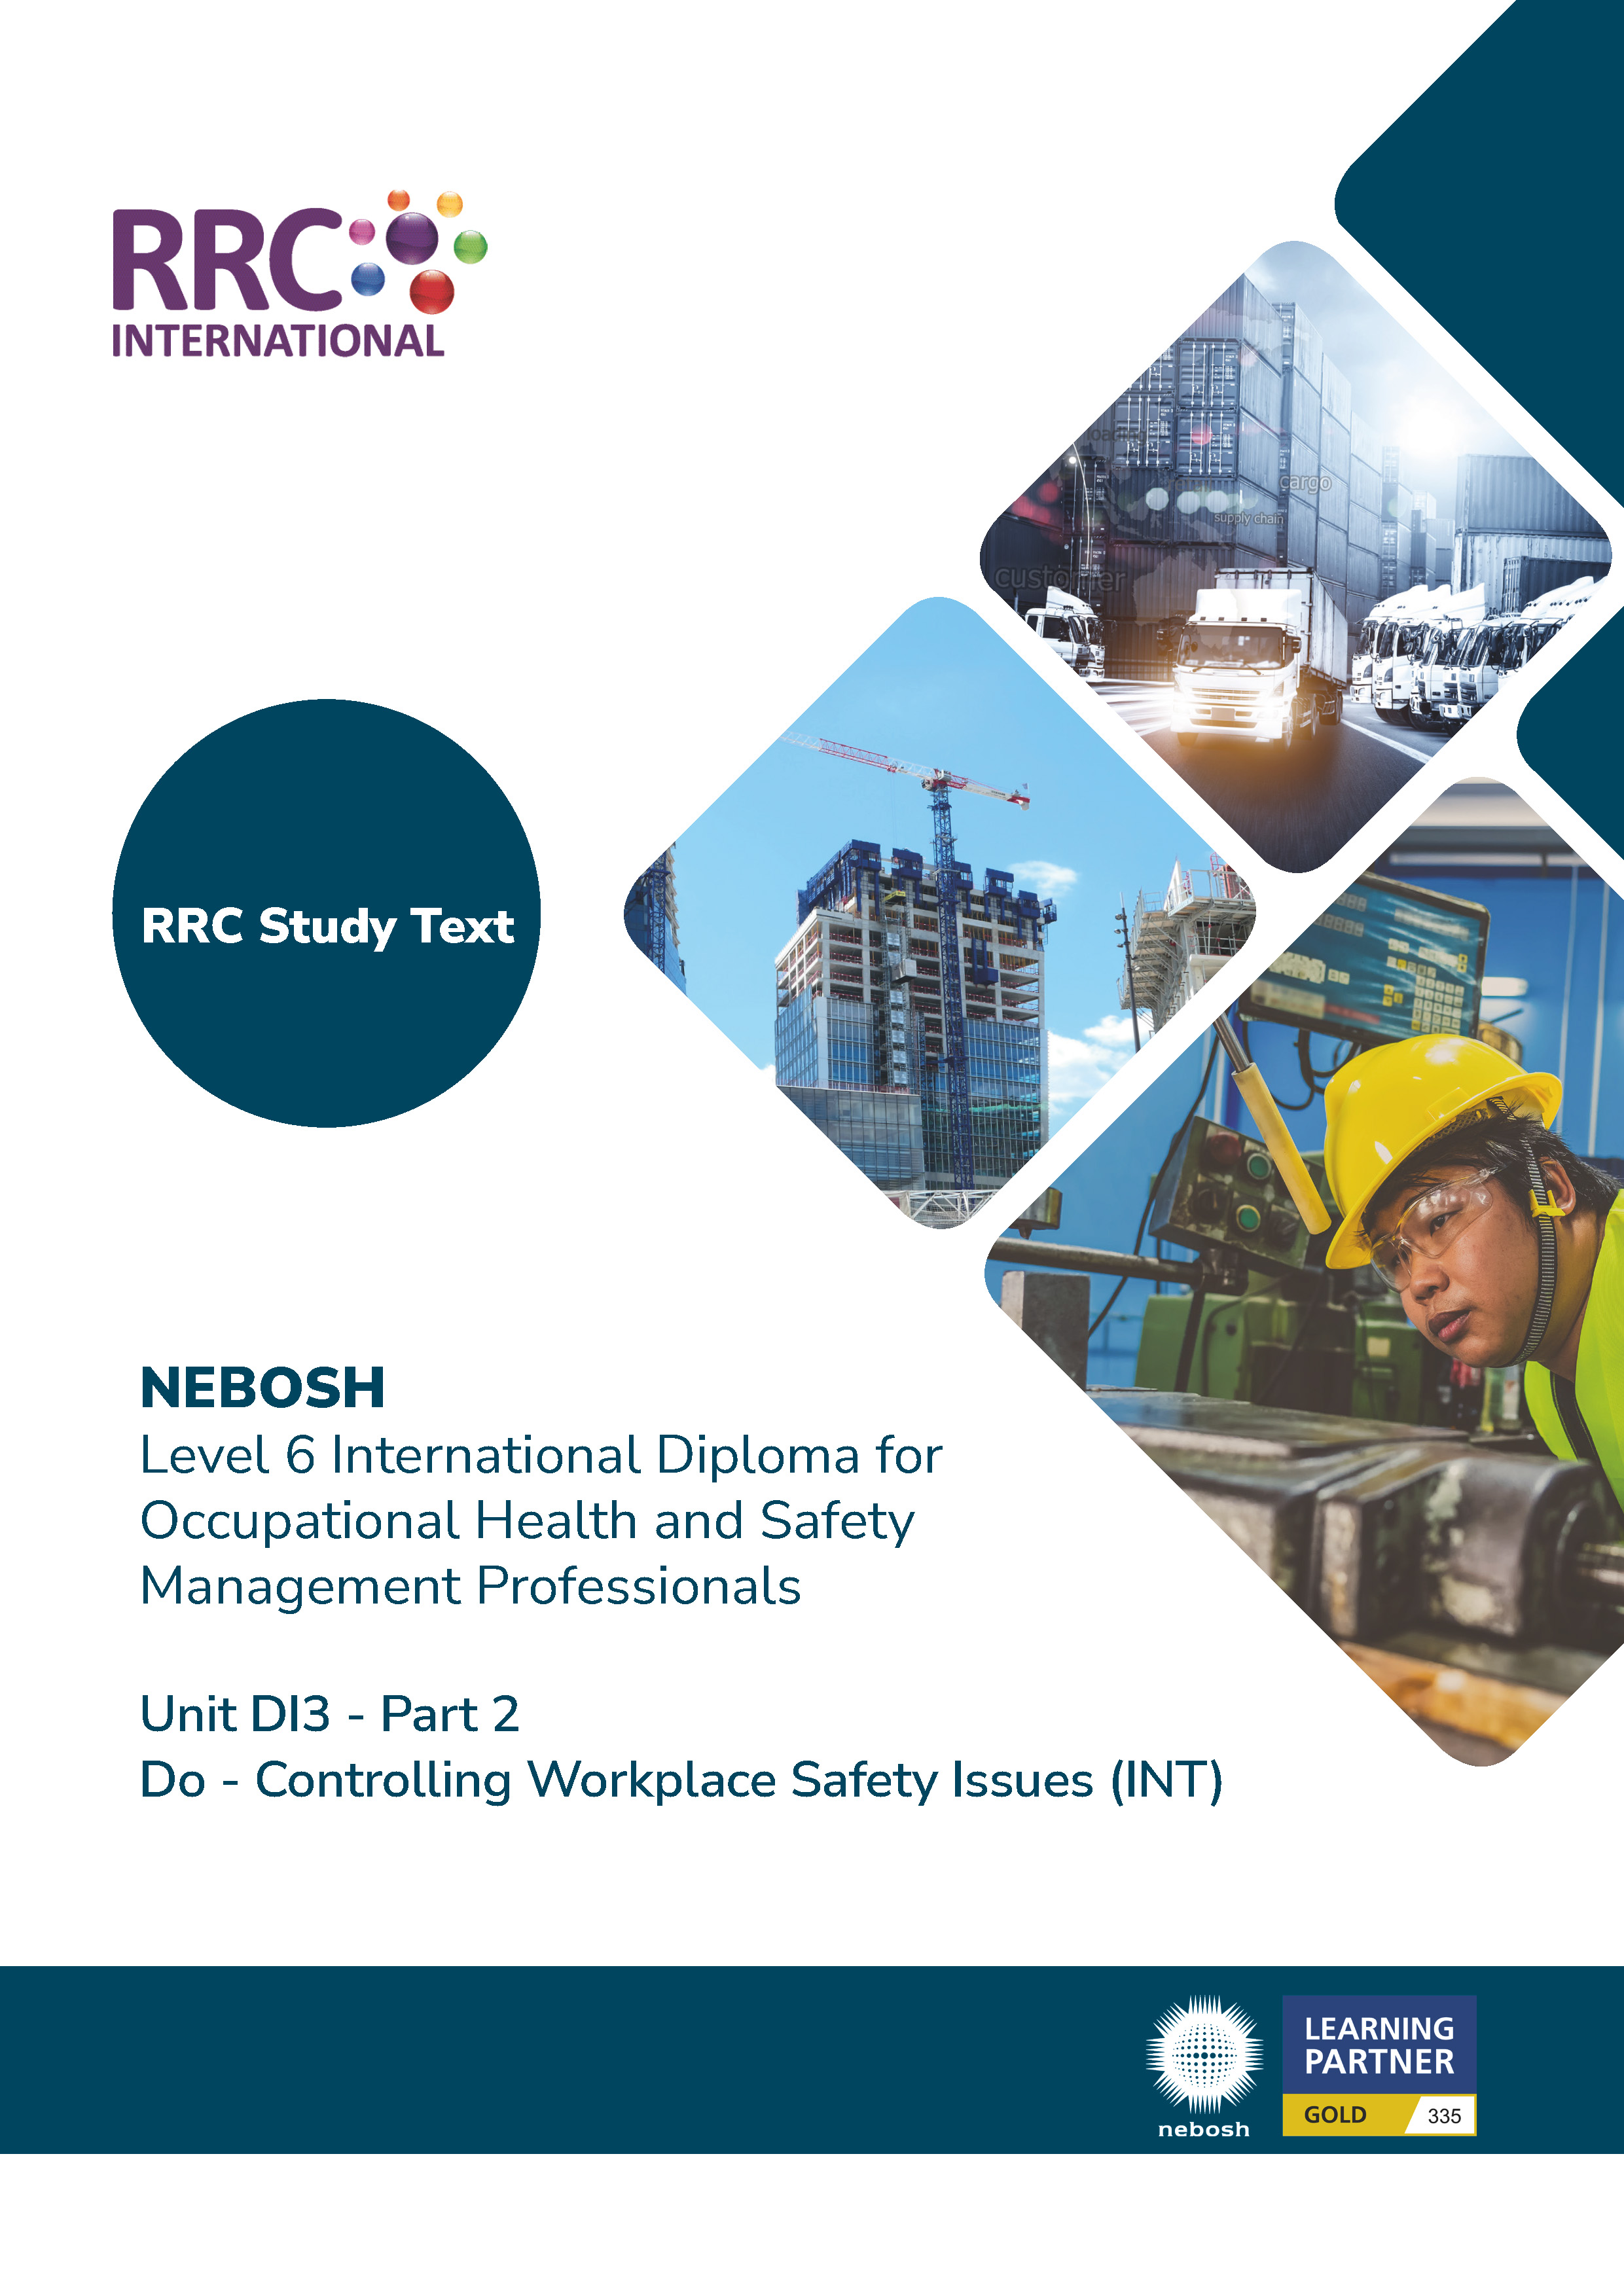 A Guide to the NEBOSH International Diploma for Occupational Health and Safety Management Professionals – Unit DI3: Do - Controlling Workplace Safety Issues (International) Book Image